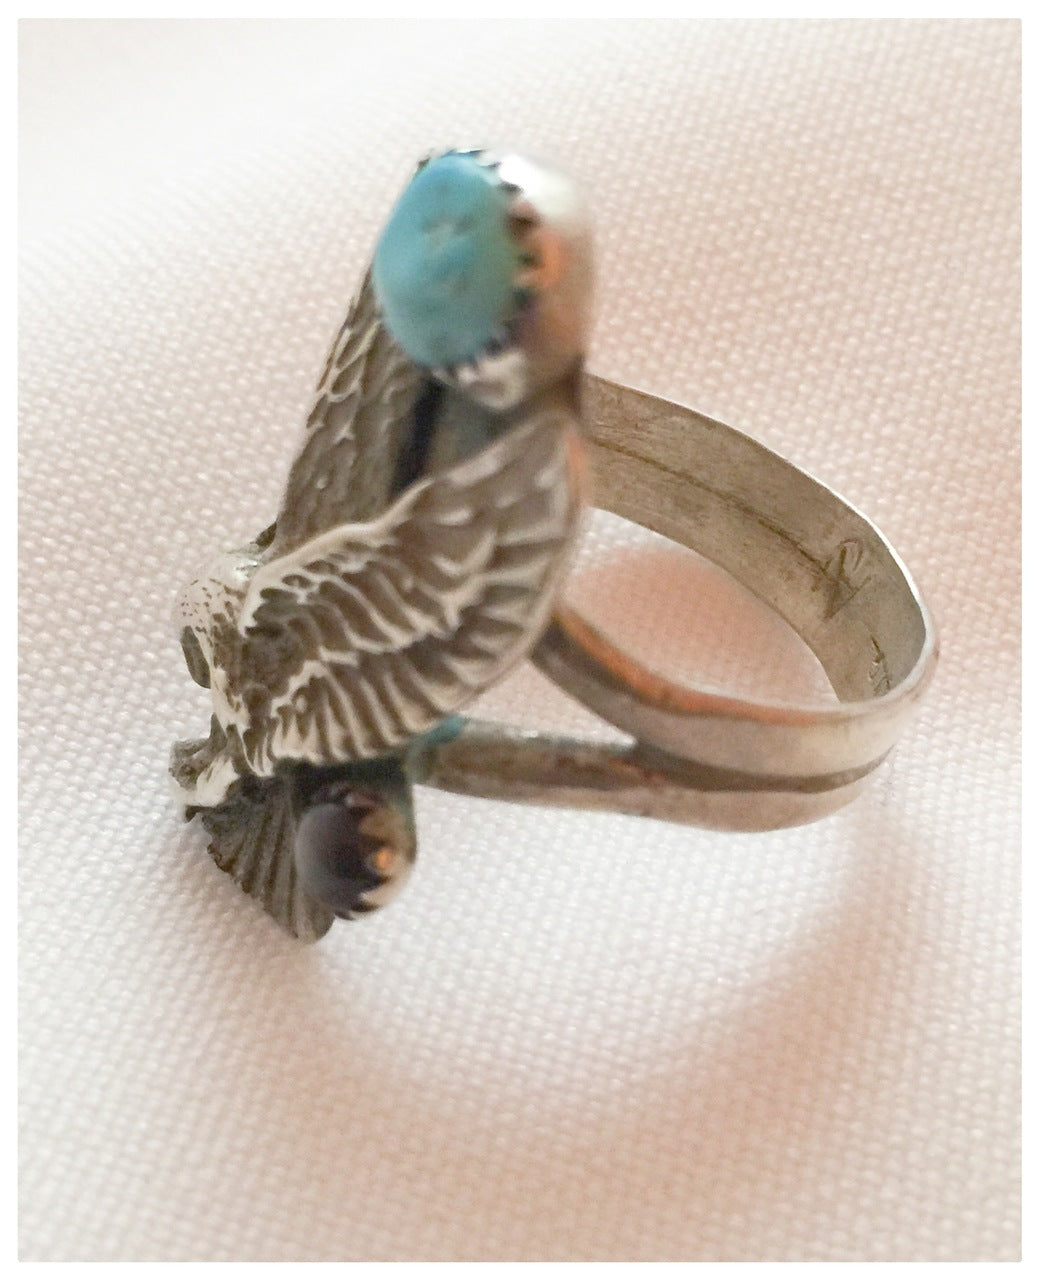 Native American Sterling Silver Dead Pawn Eagle Ring with Turquoise Size 9 1/4 Signed AJ